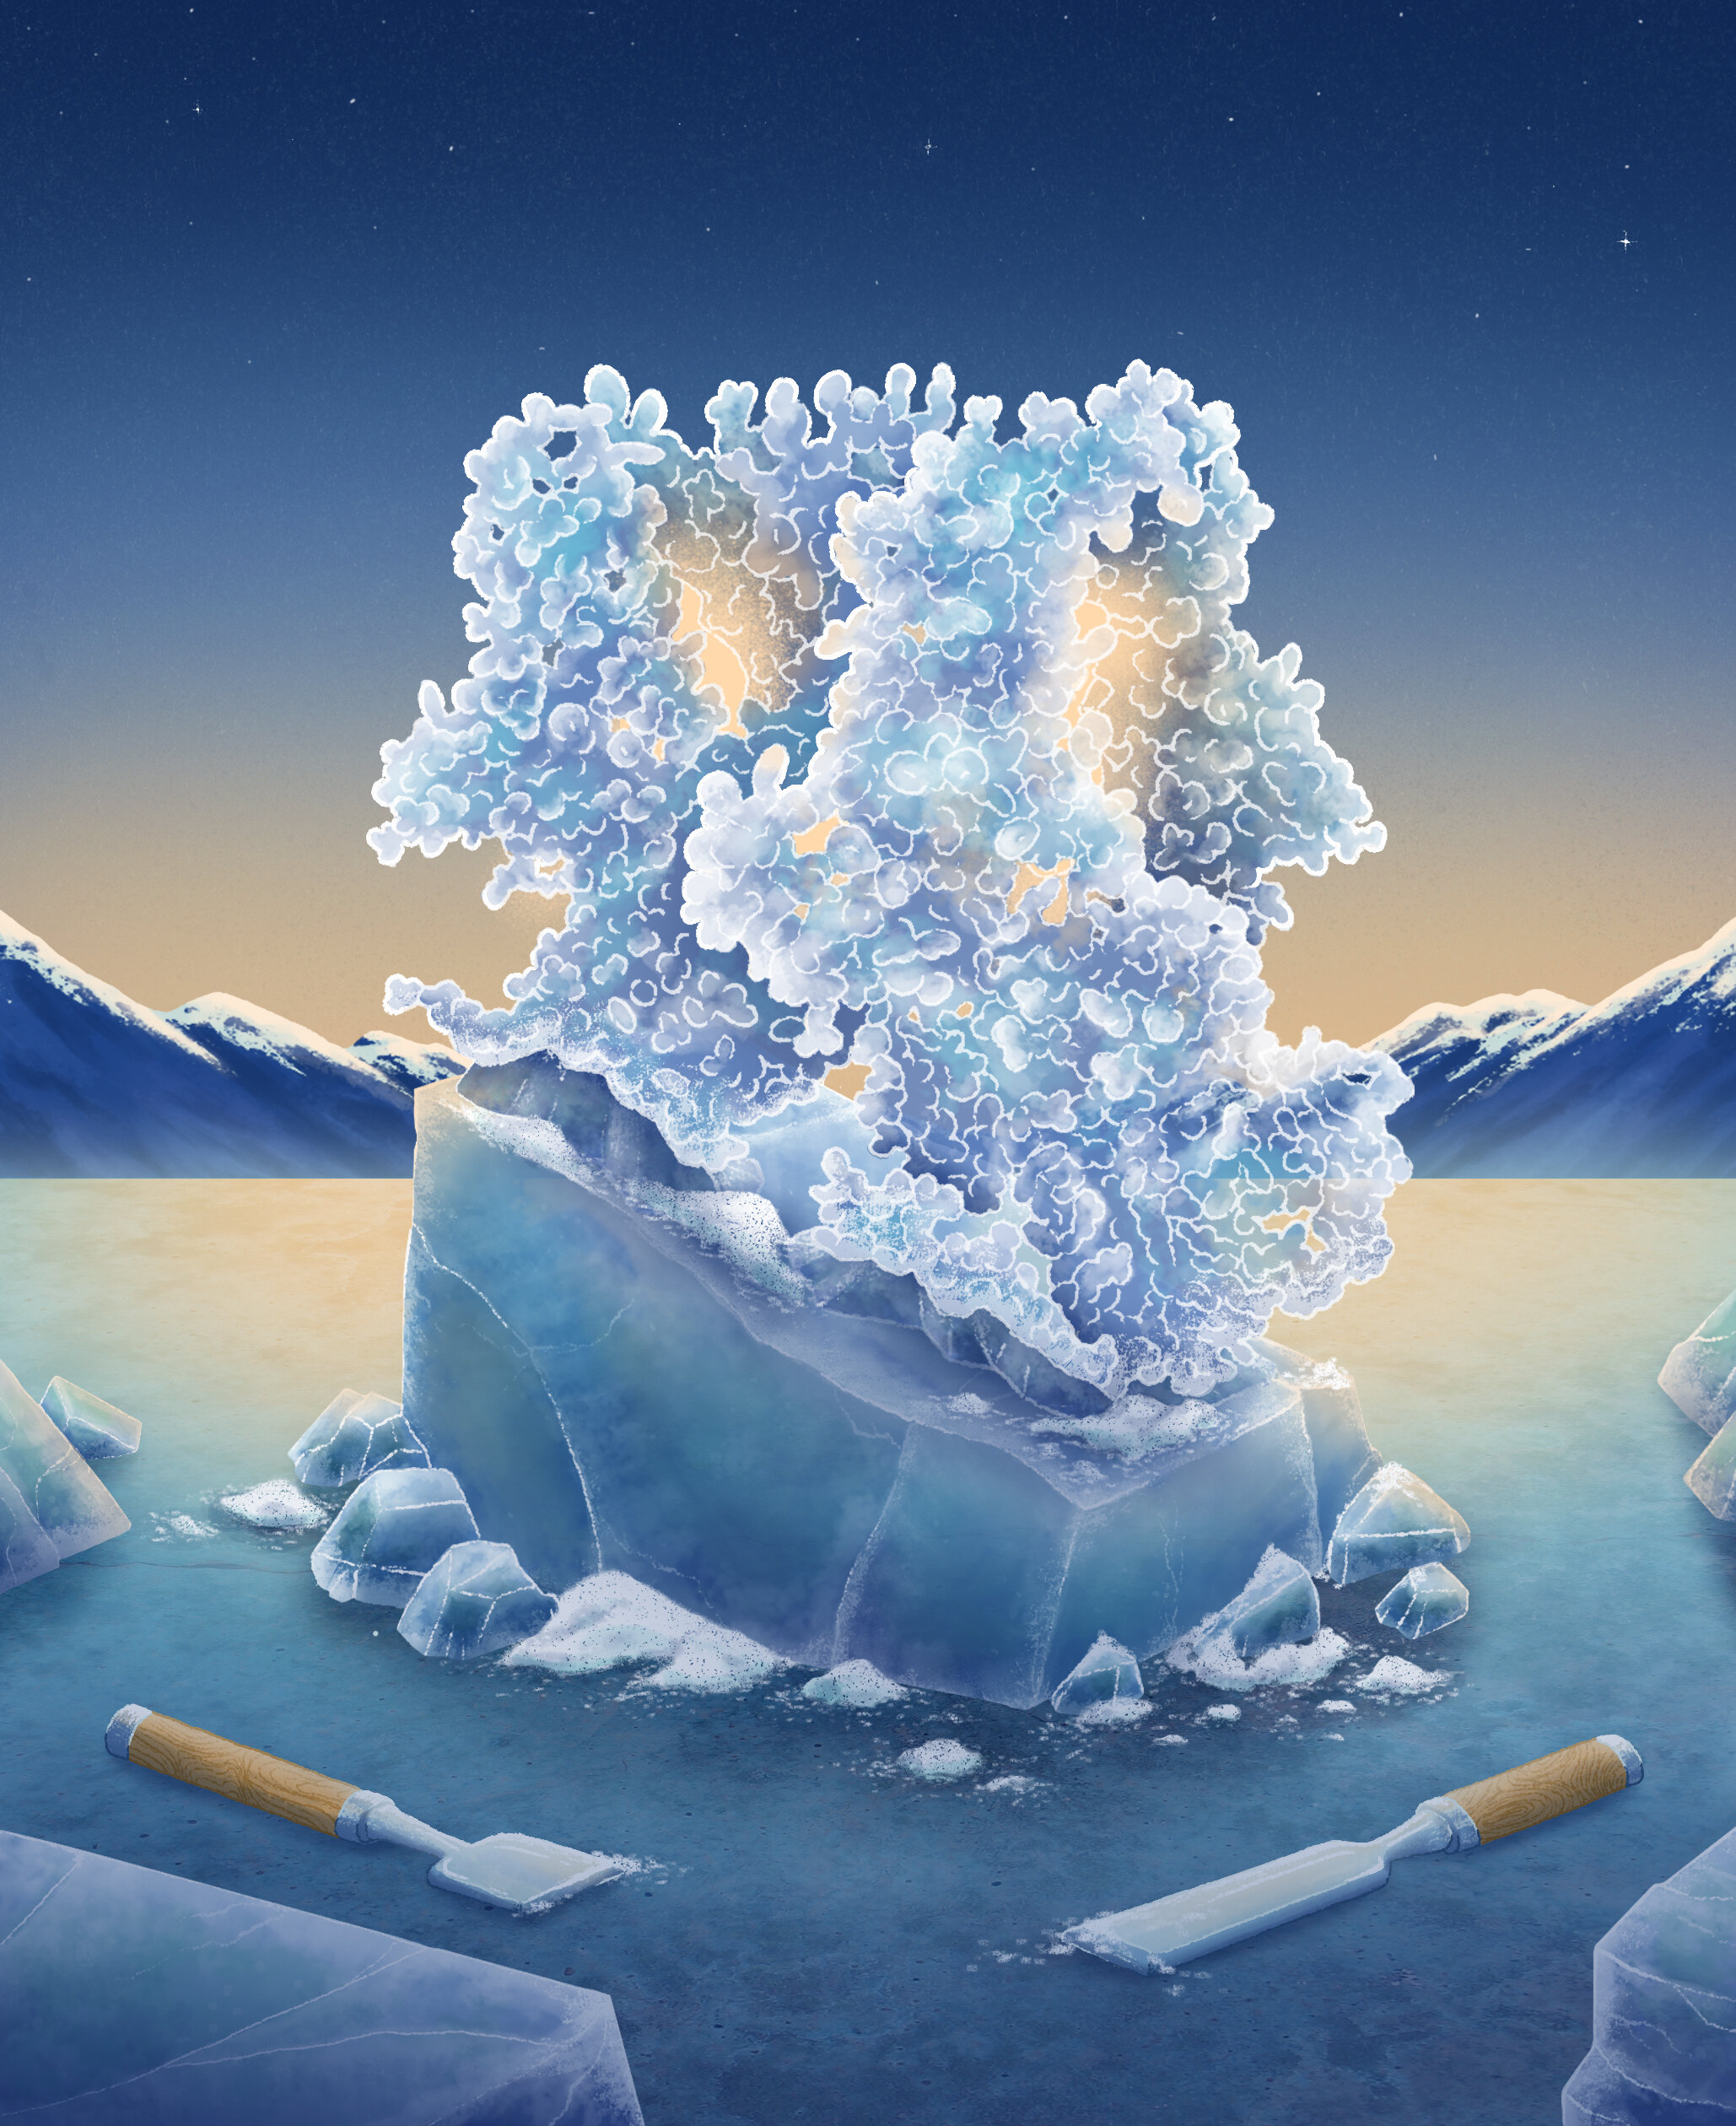 The image is an interpretation of the role of the TRPM8 channel—the primary player responsible for cold sensation in humans. The concept of sculpting ice refers not only to the cold sensation itself triggered by the opening of this channel, but also to the process of discovering further how its complex structure works. Credit: Joana C. Carvalho